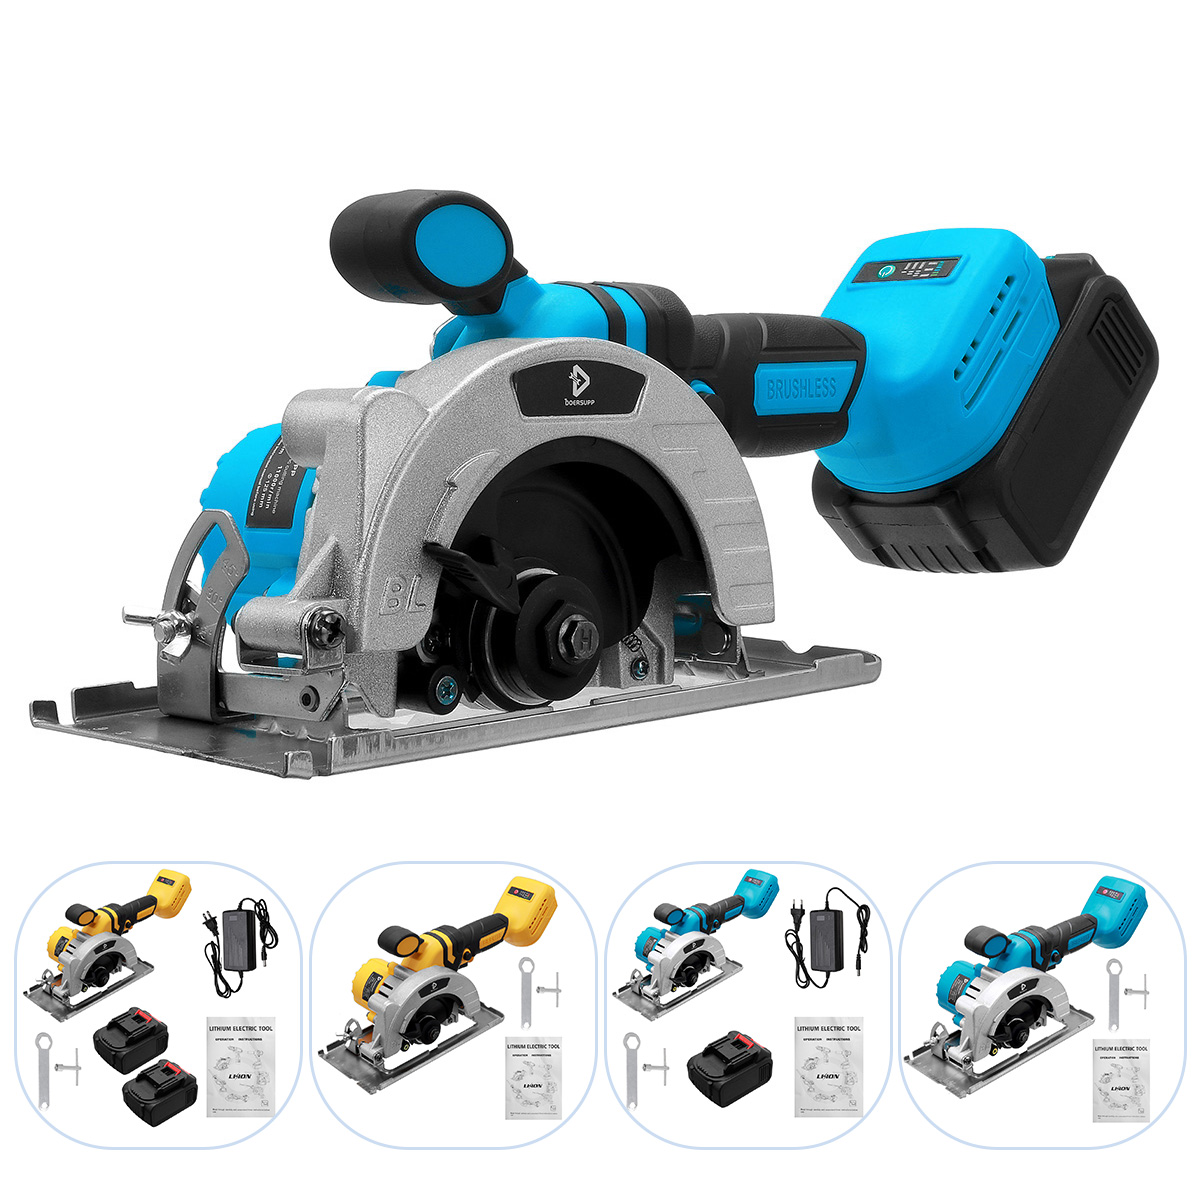 20V-125MM-Electric-Cordless-Brushless-Circular-Saw-Auxiliary-Handle-Household-Woodworking-Tools-DIY--1907960-16